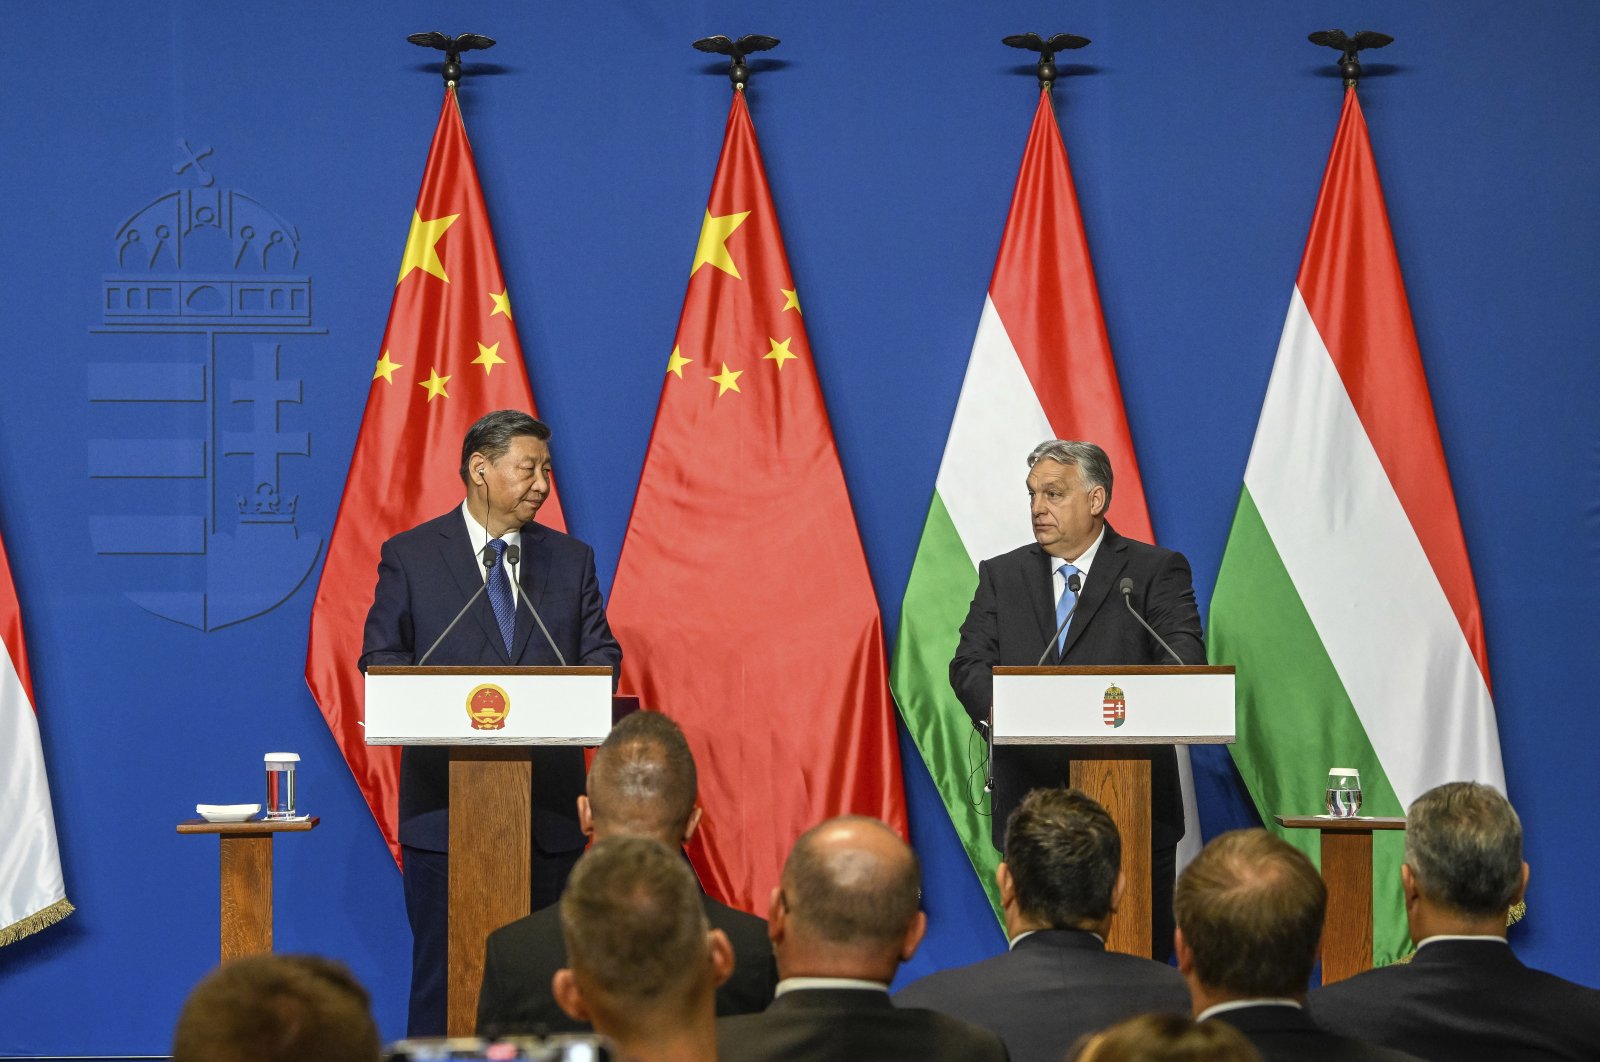 China, Hungary to embark on ‘golden voyage’ in ties after Xi’s visit